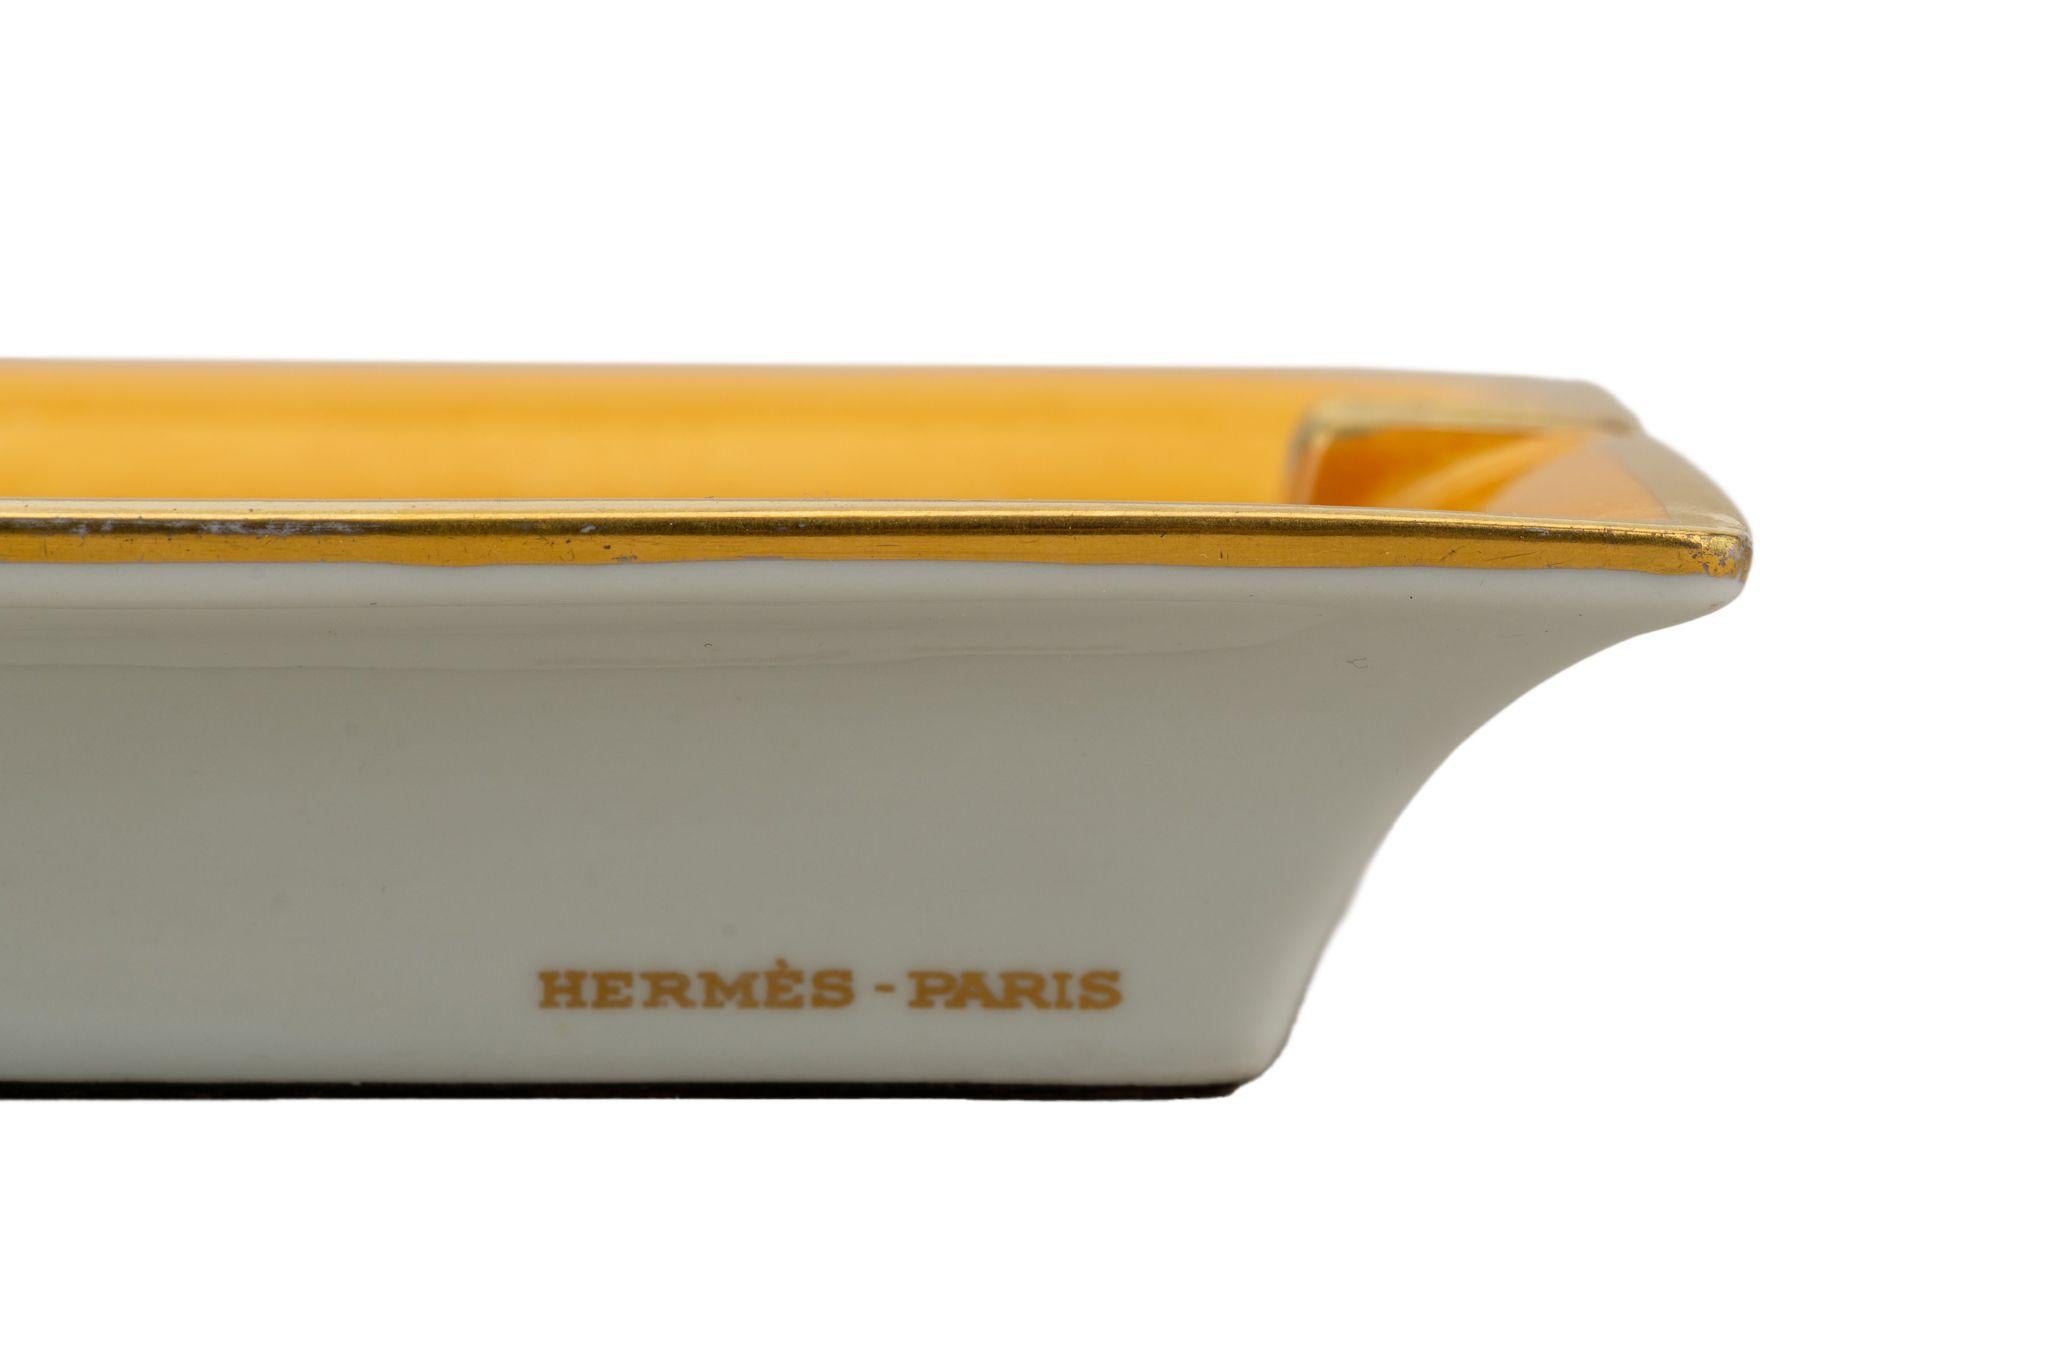 Hermès Arab Horses Porcelain Ashtray In Excellent Condition For Sale In West Hollywood, CA